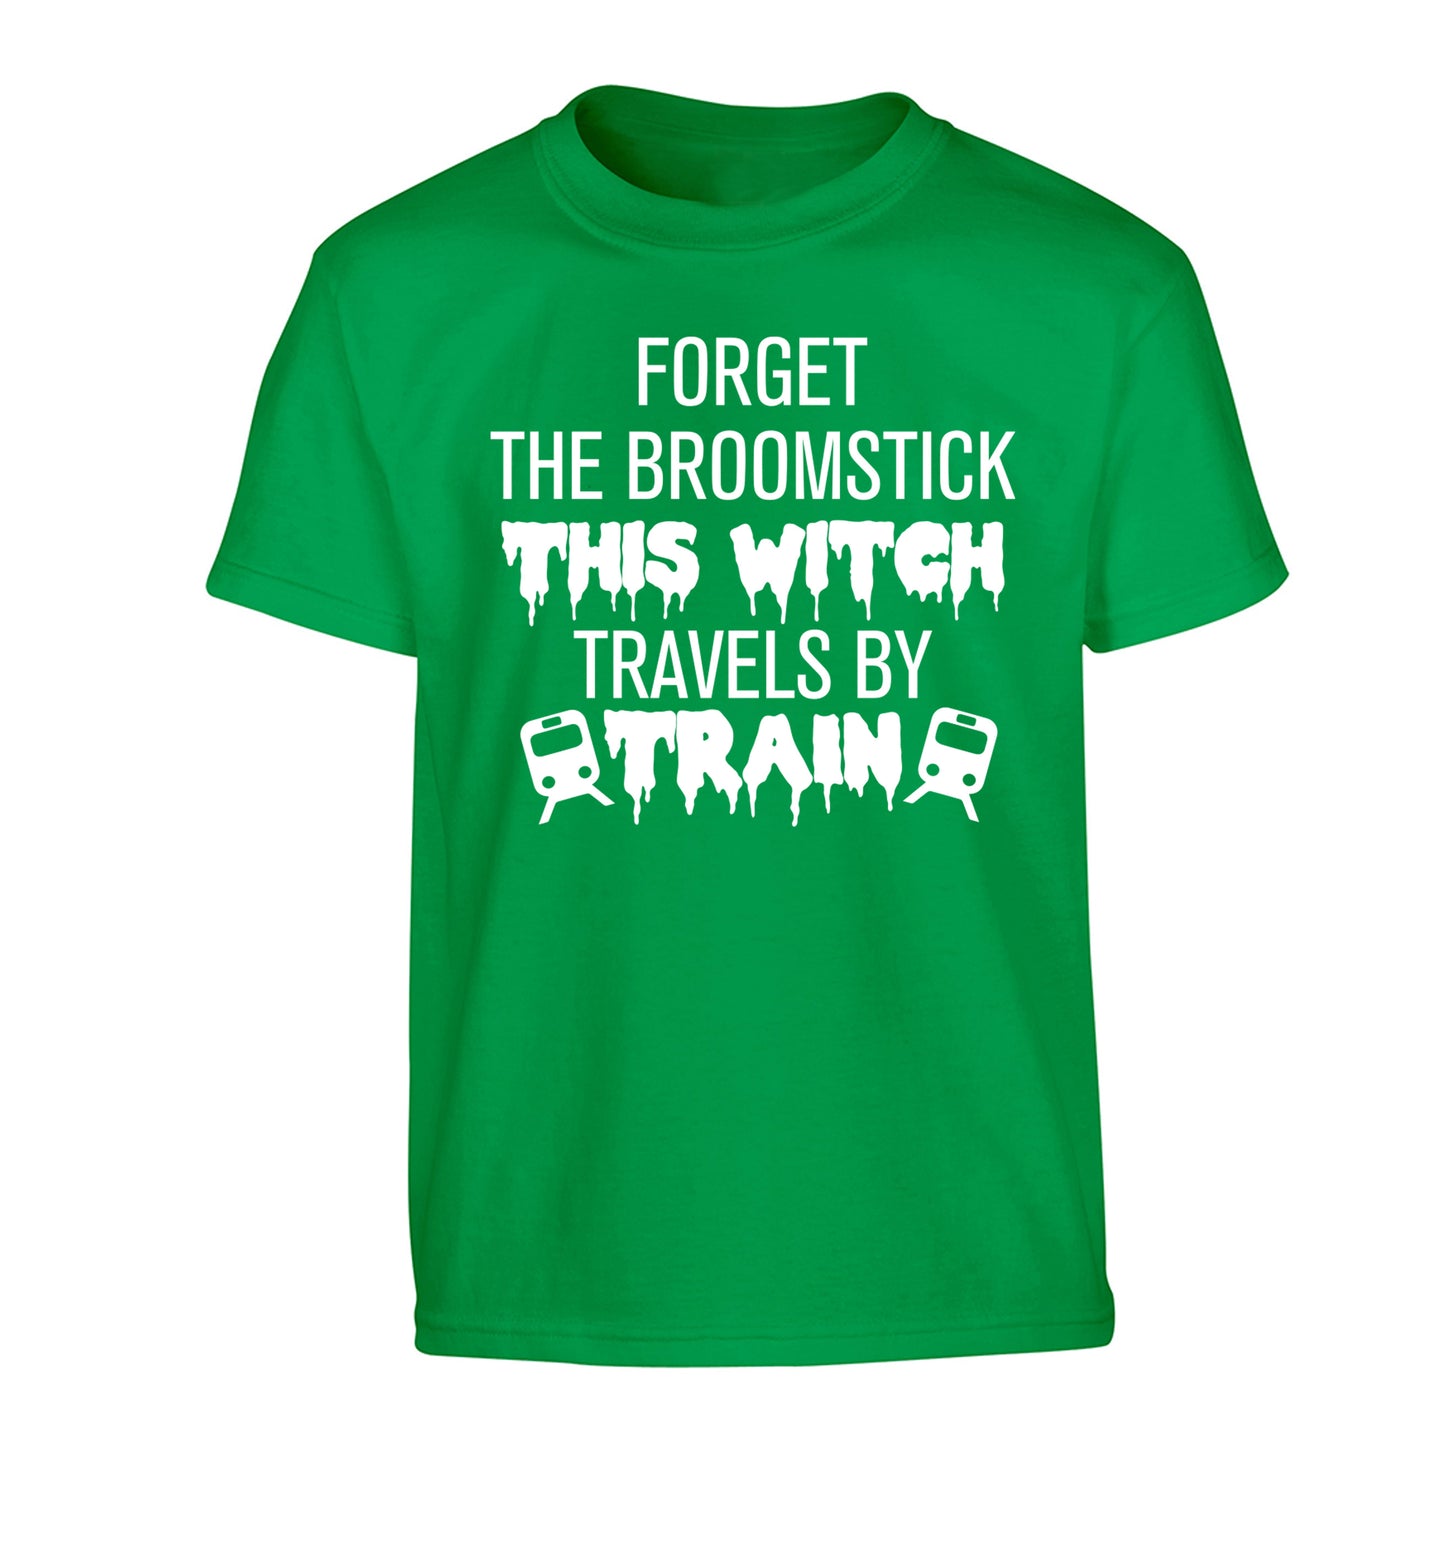 Forget the broomstick this witch travels by train Children's green Tshirt 12-14 Years